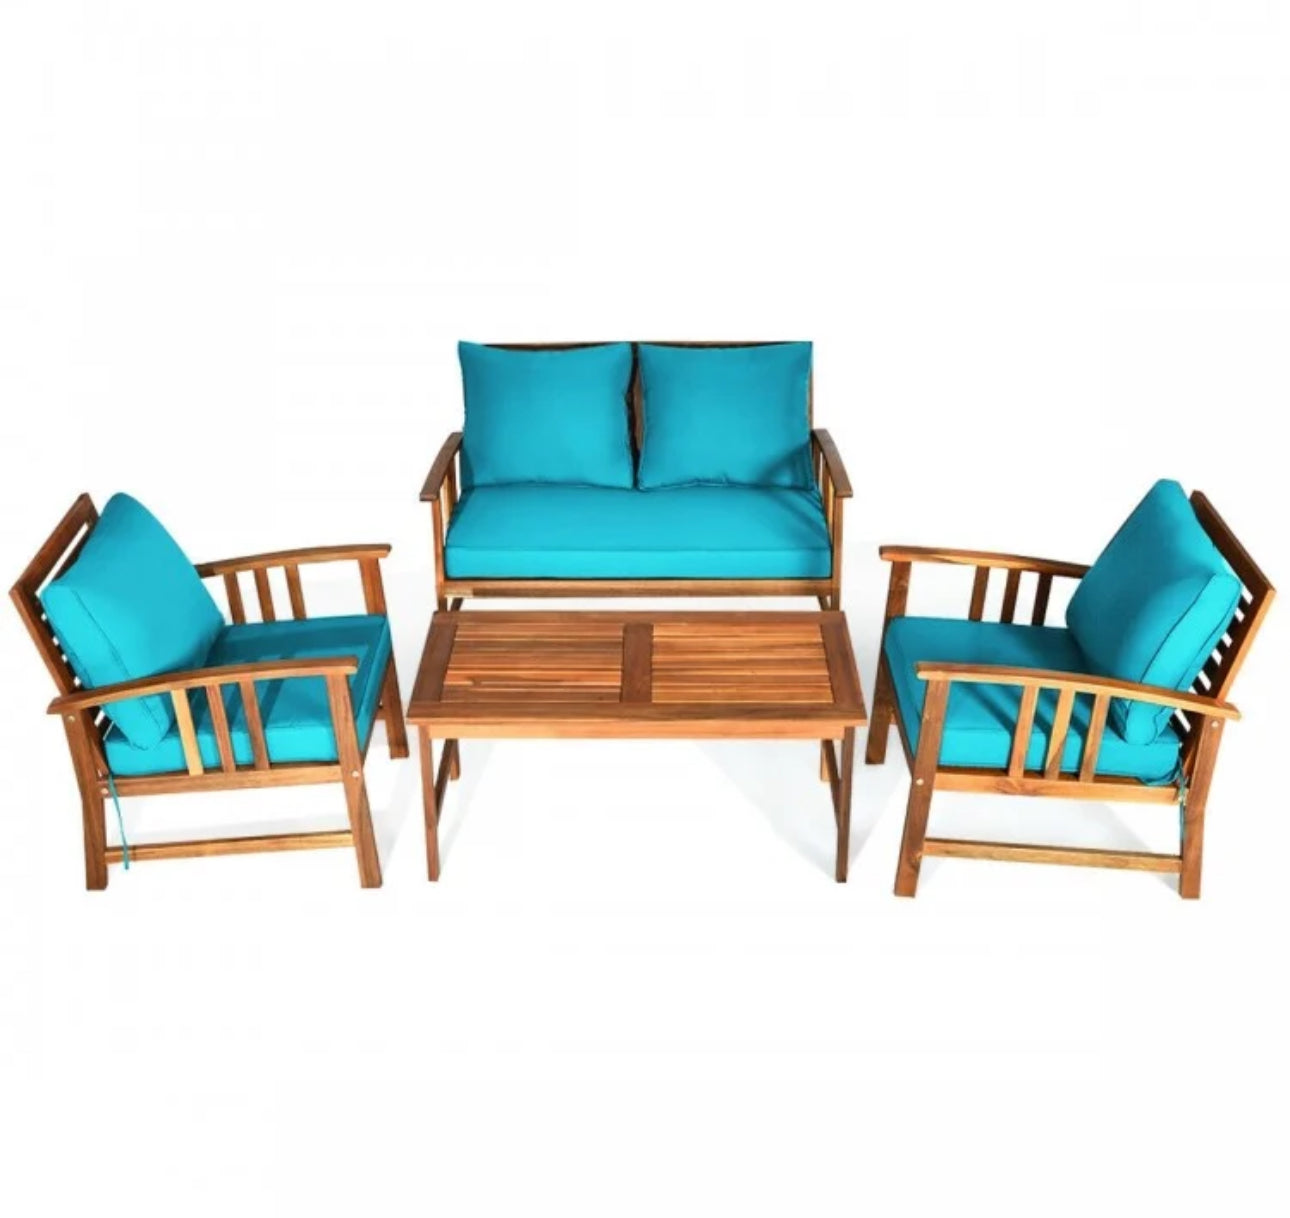 Heavy Duty Comfortable 4 Piece Acacia Wooden Patio Sofa Furniture Chair Set With Thick Cushions | Multiple Combinations